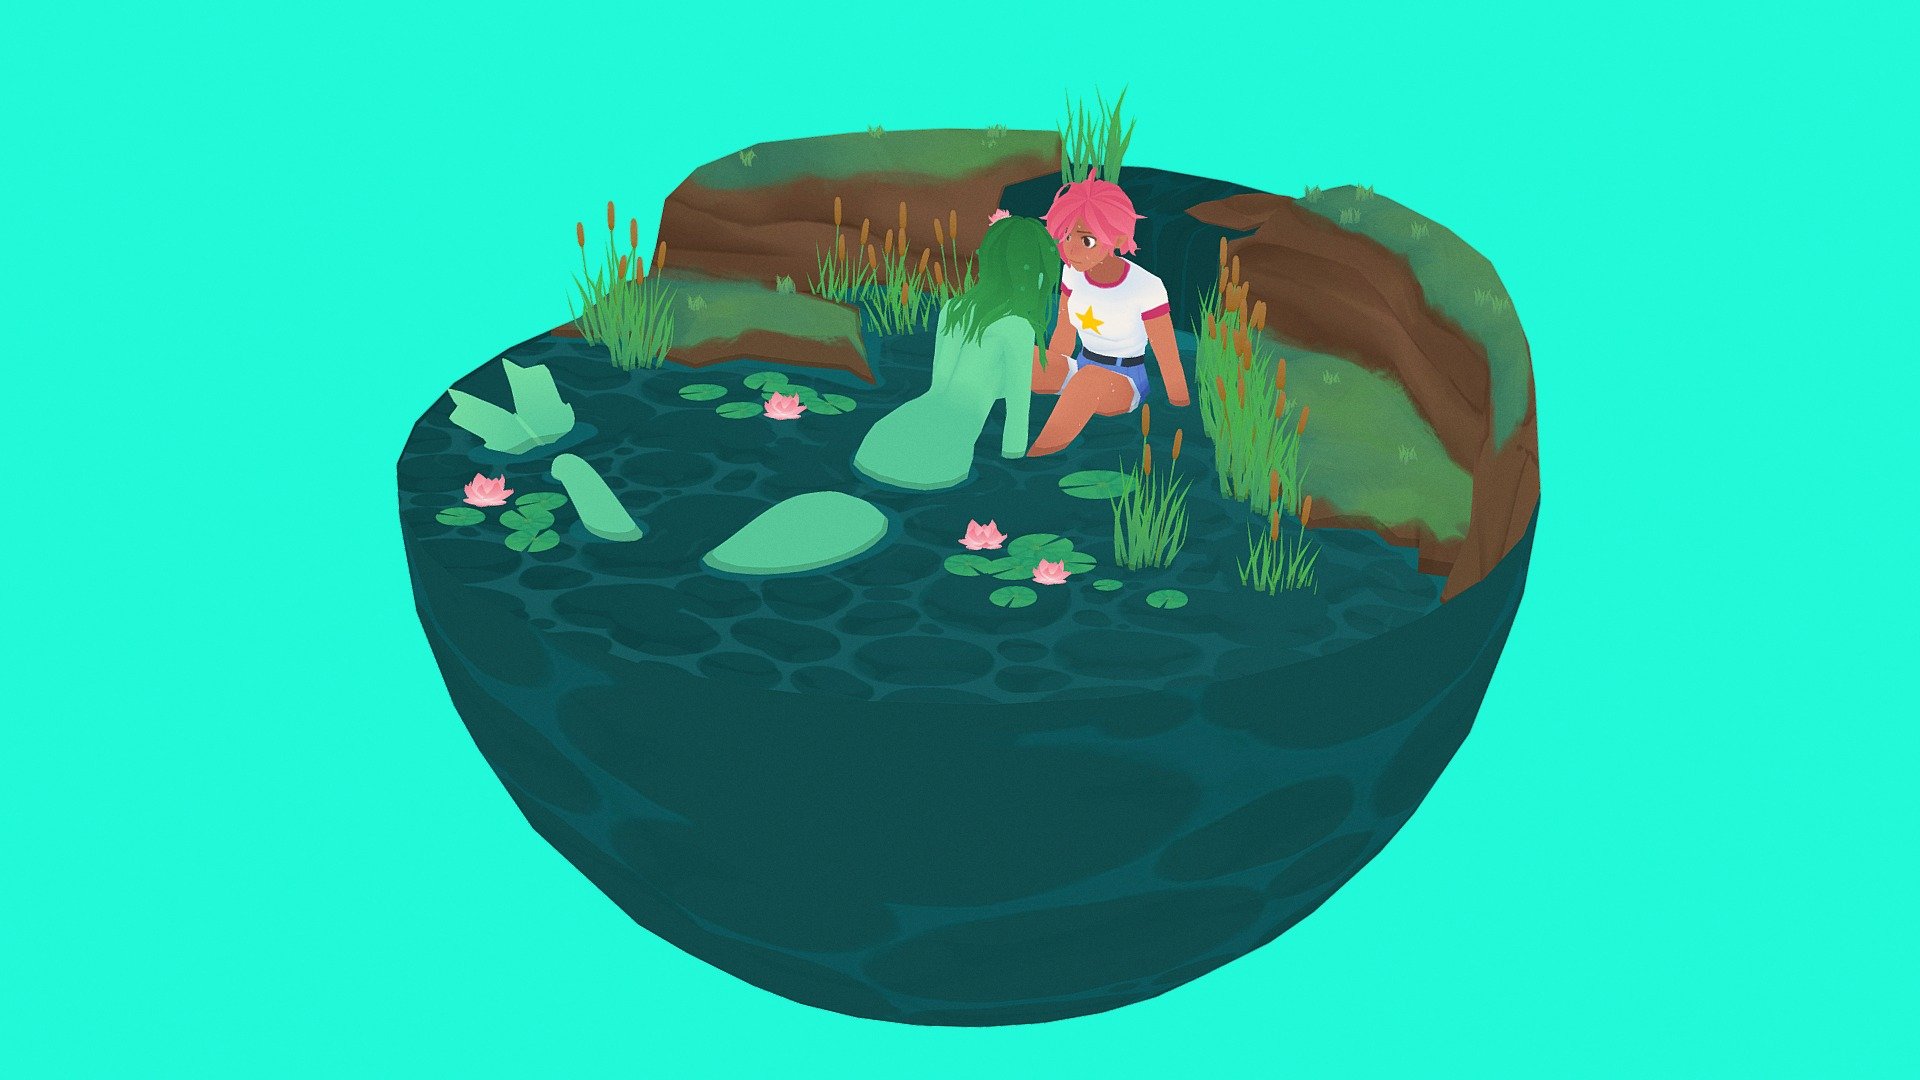 It's mermay again so I decided to quickly whip up another scene. Tried to make it look like it's set in a lake or pond - A Mermaid's Encounter - 3D model by Priichu 3d model